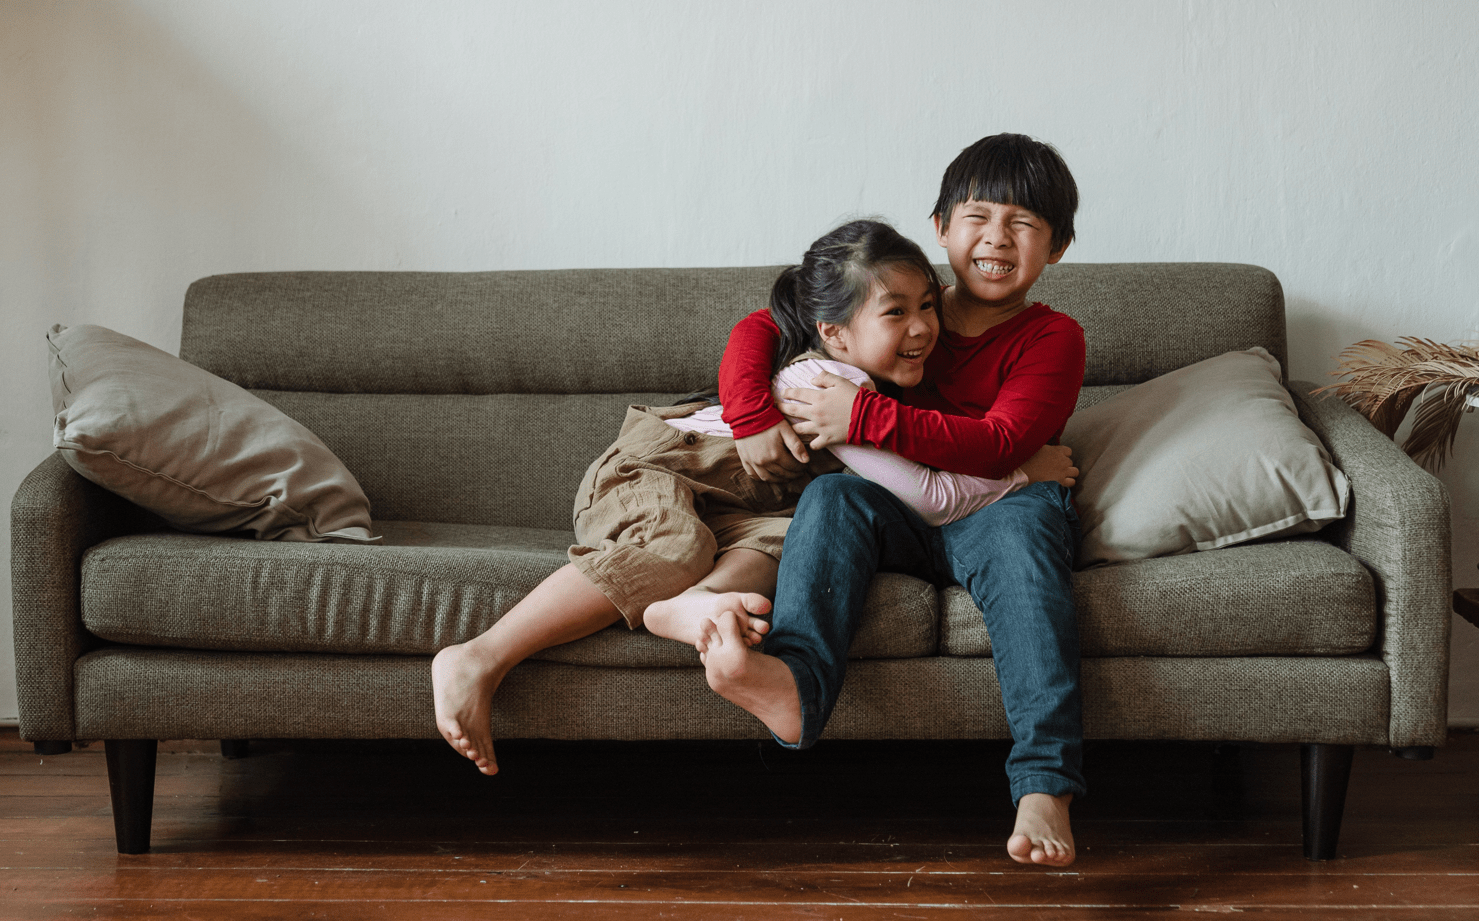 Two smiling kids playing on a brown couch